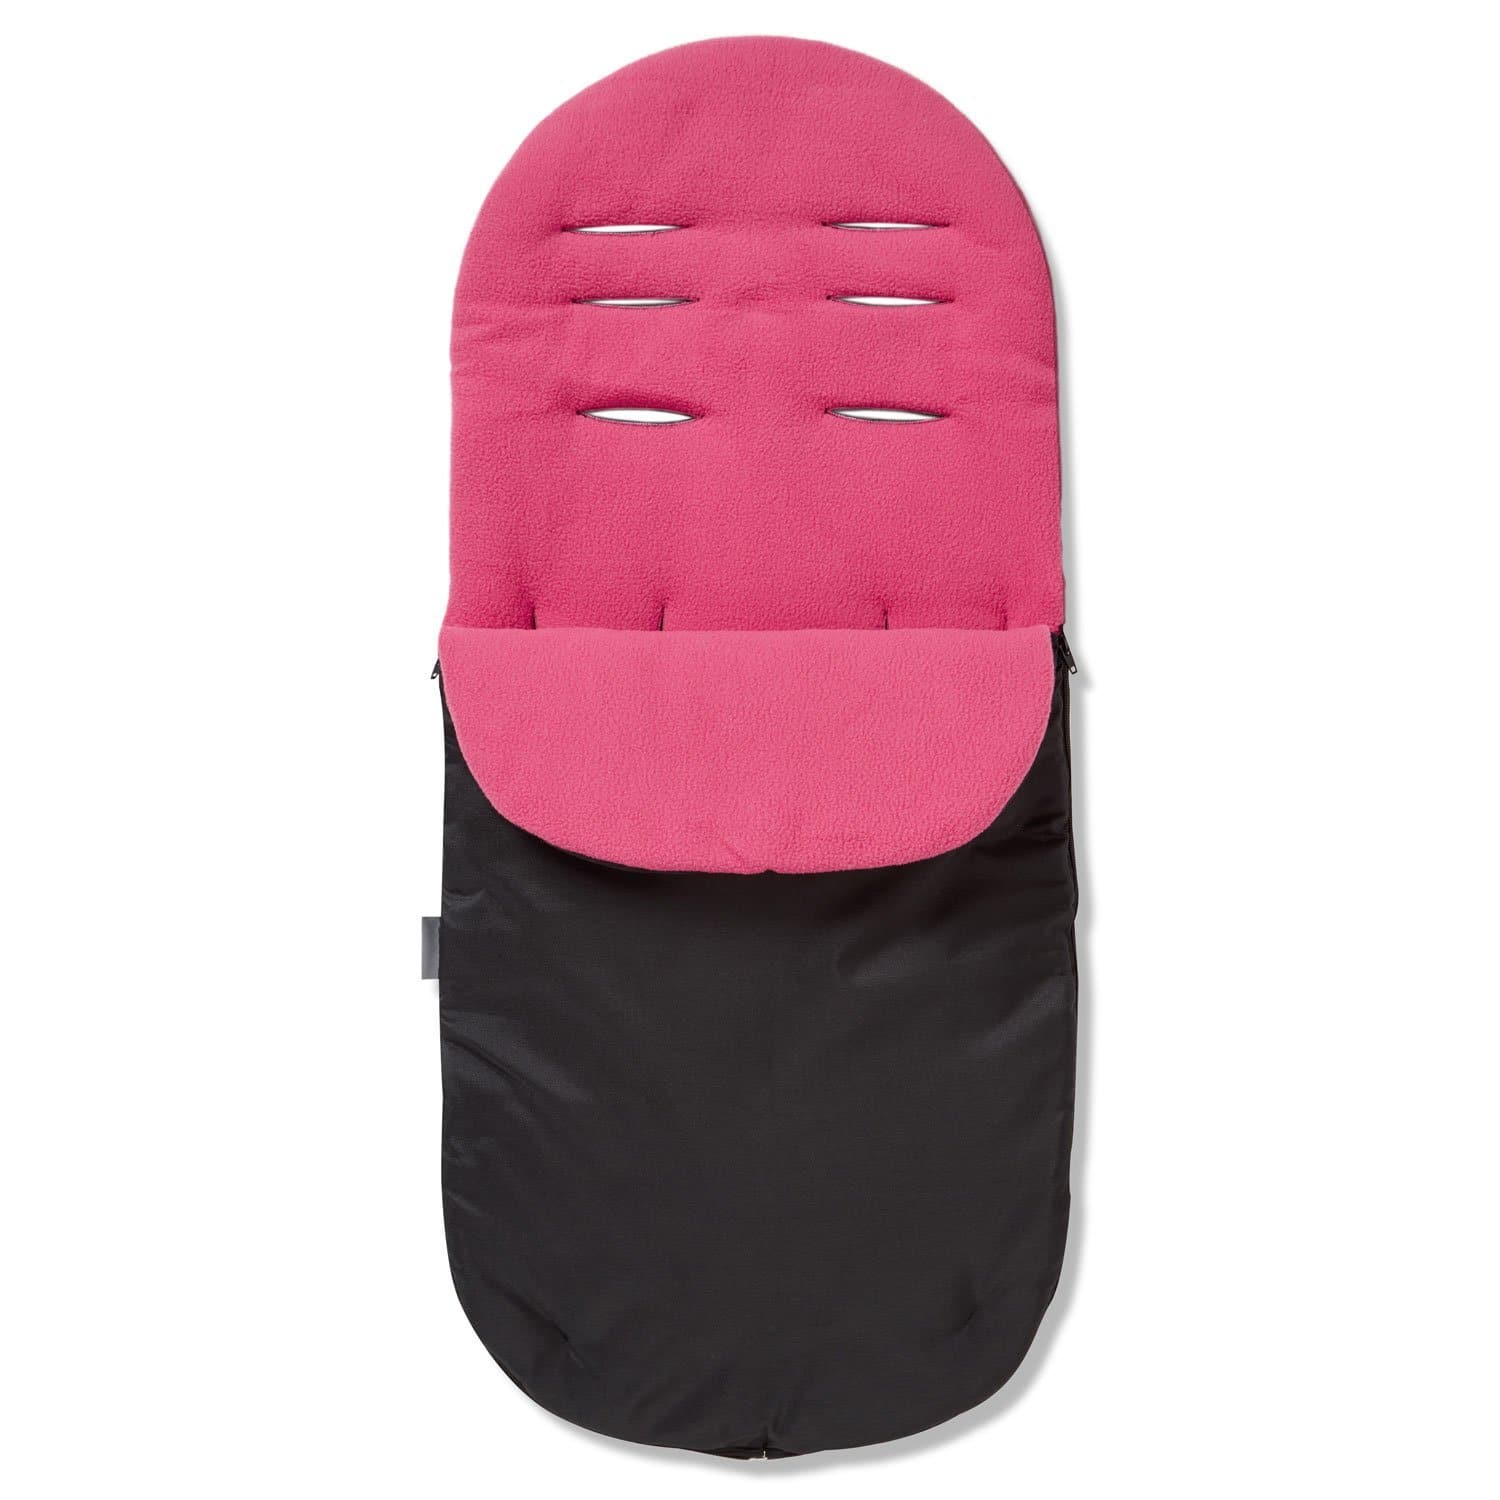 Footmuff / Cosy Toes Compatible with Petite - Dark Pink / Fits All Models | For Your Little One